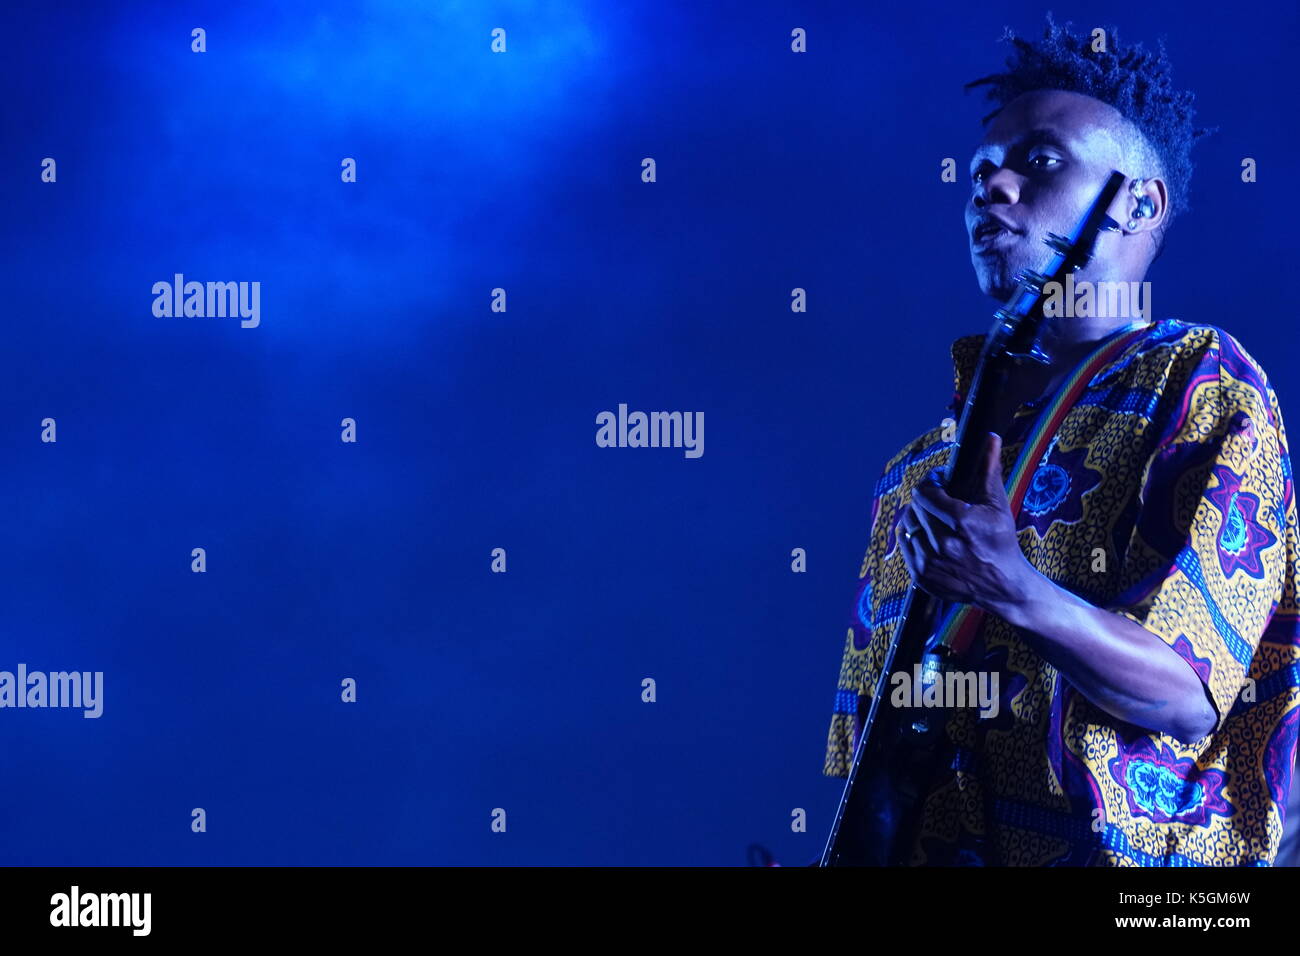 London, UK. 9th September, 2017. Gbenga Adelekan of Metronomy performing live on the Main Stage at the 2017 OnBlackheath Festival in Blackheath, London. Photo date: Saturday, September 9, 2017. Photo credit should read: Roger Garfield/Alamy Live News Stock Photo